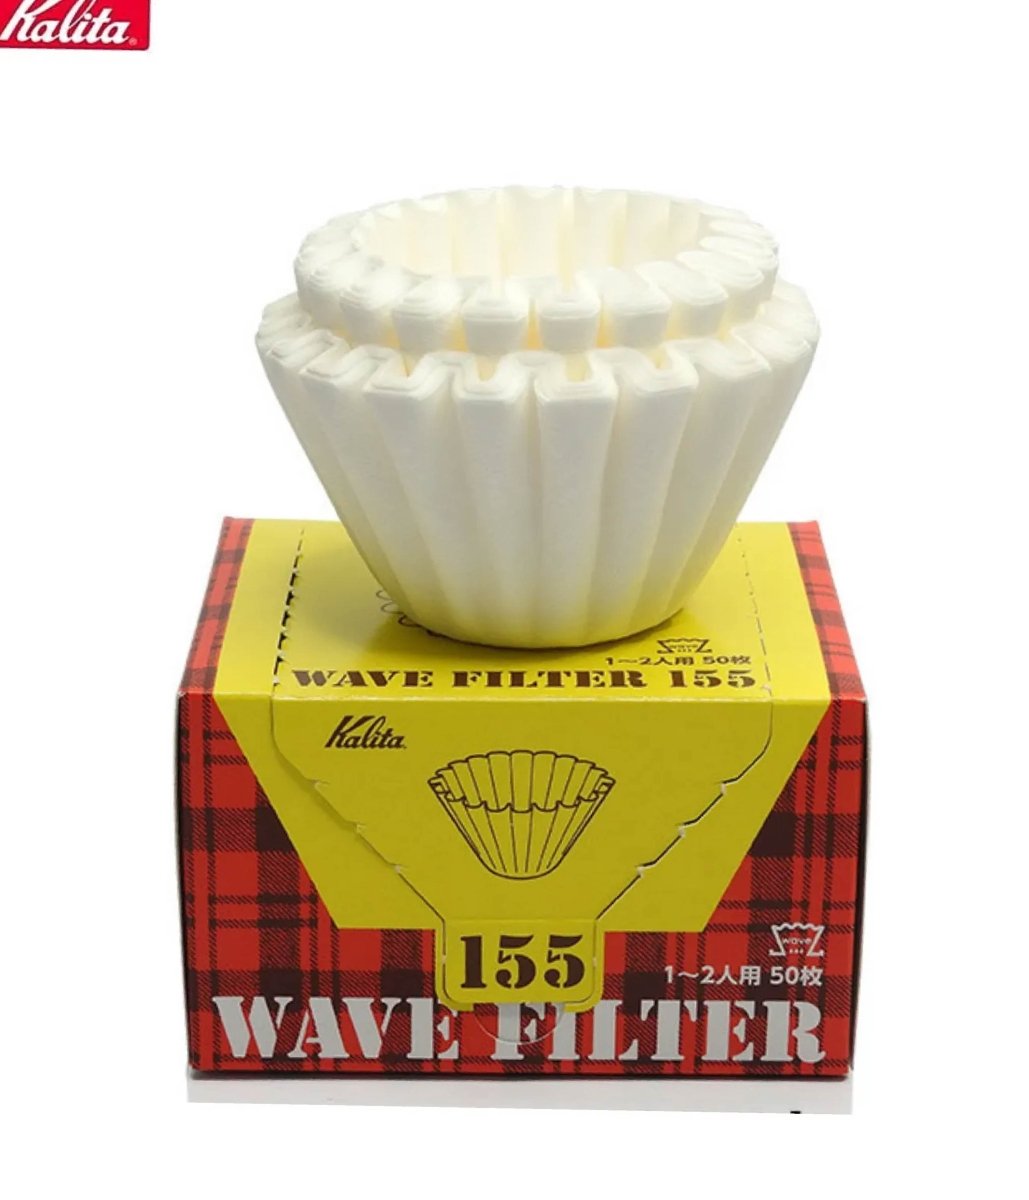 Kalita Wave Paper Filters 50 Pack - Vanguard Specialty Coffee Company -